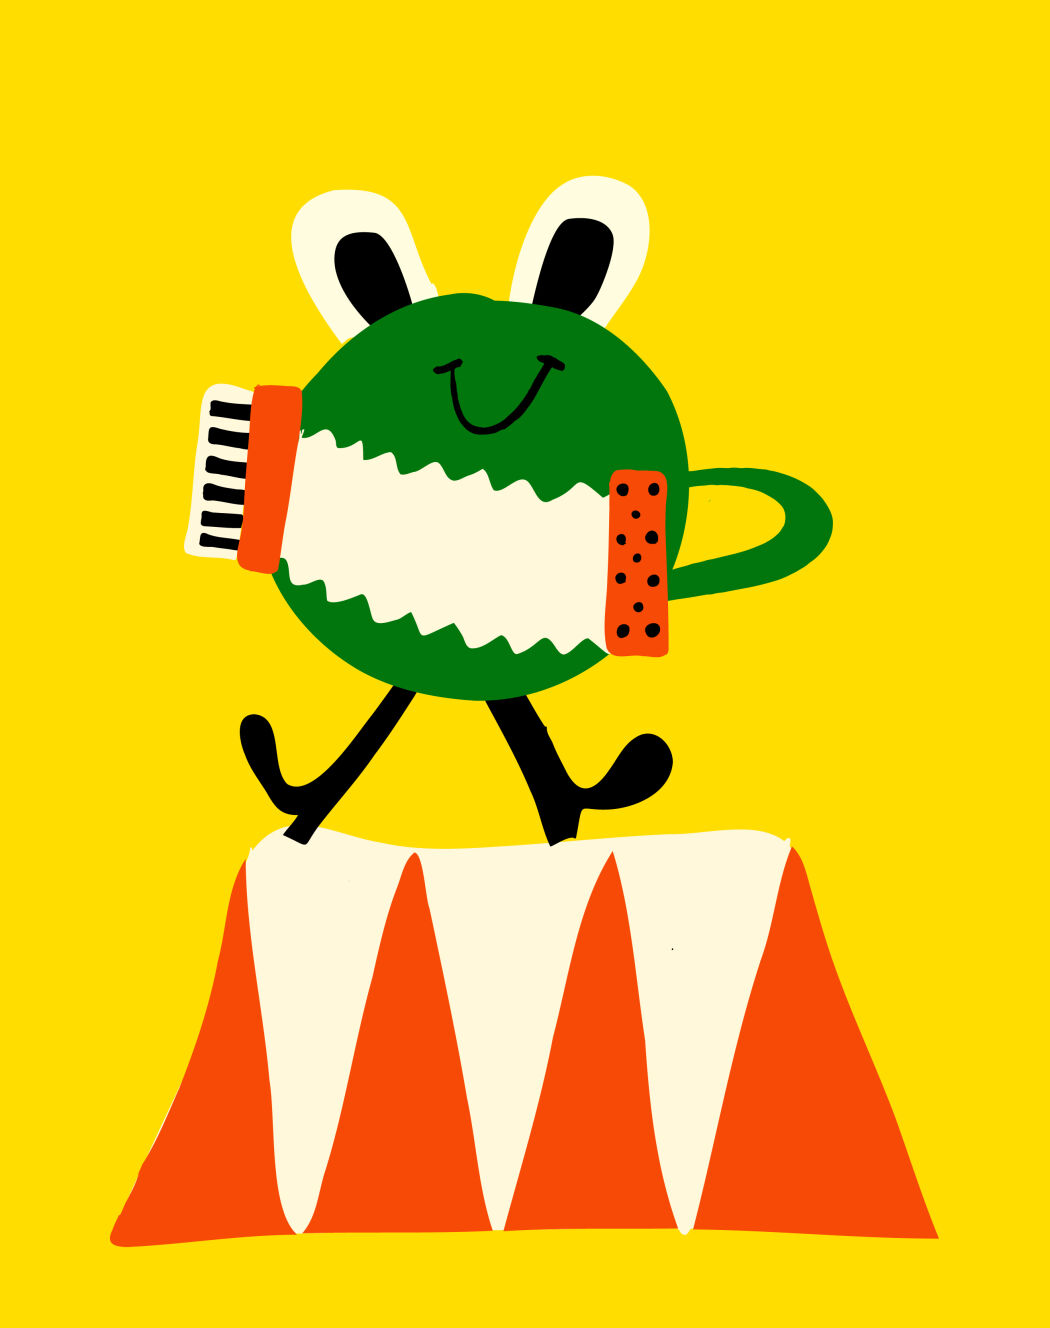 Playful character design by the award winning illustrator Erica Jacobson